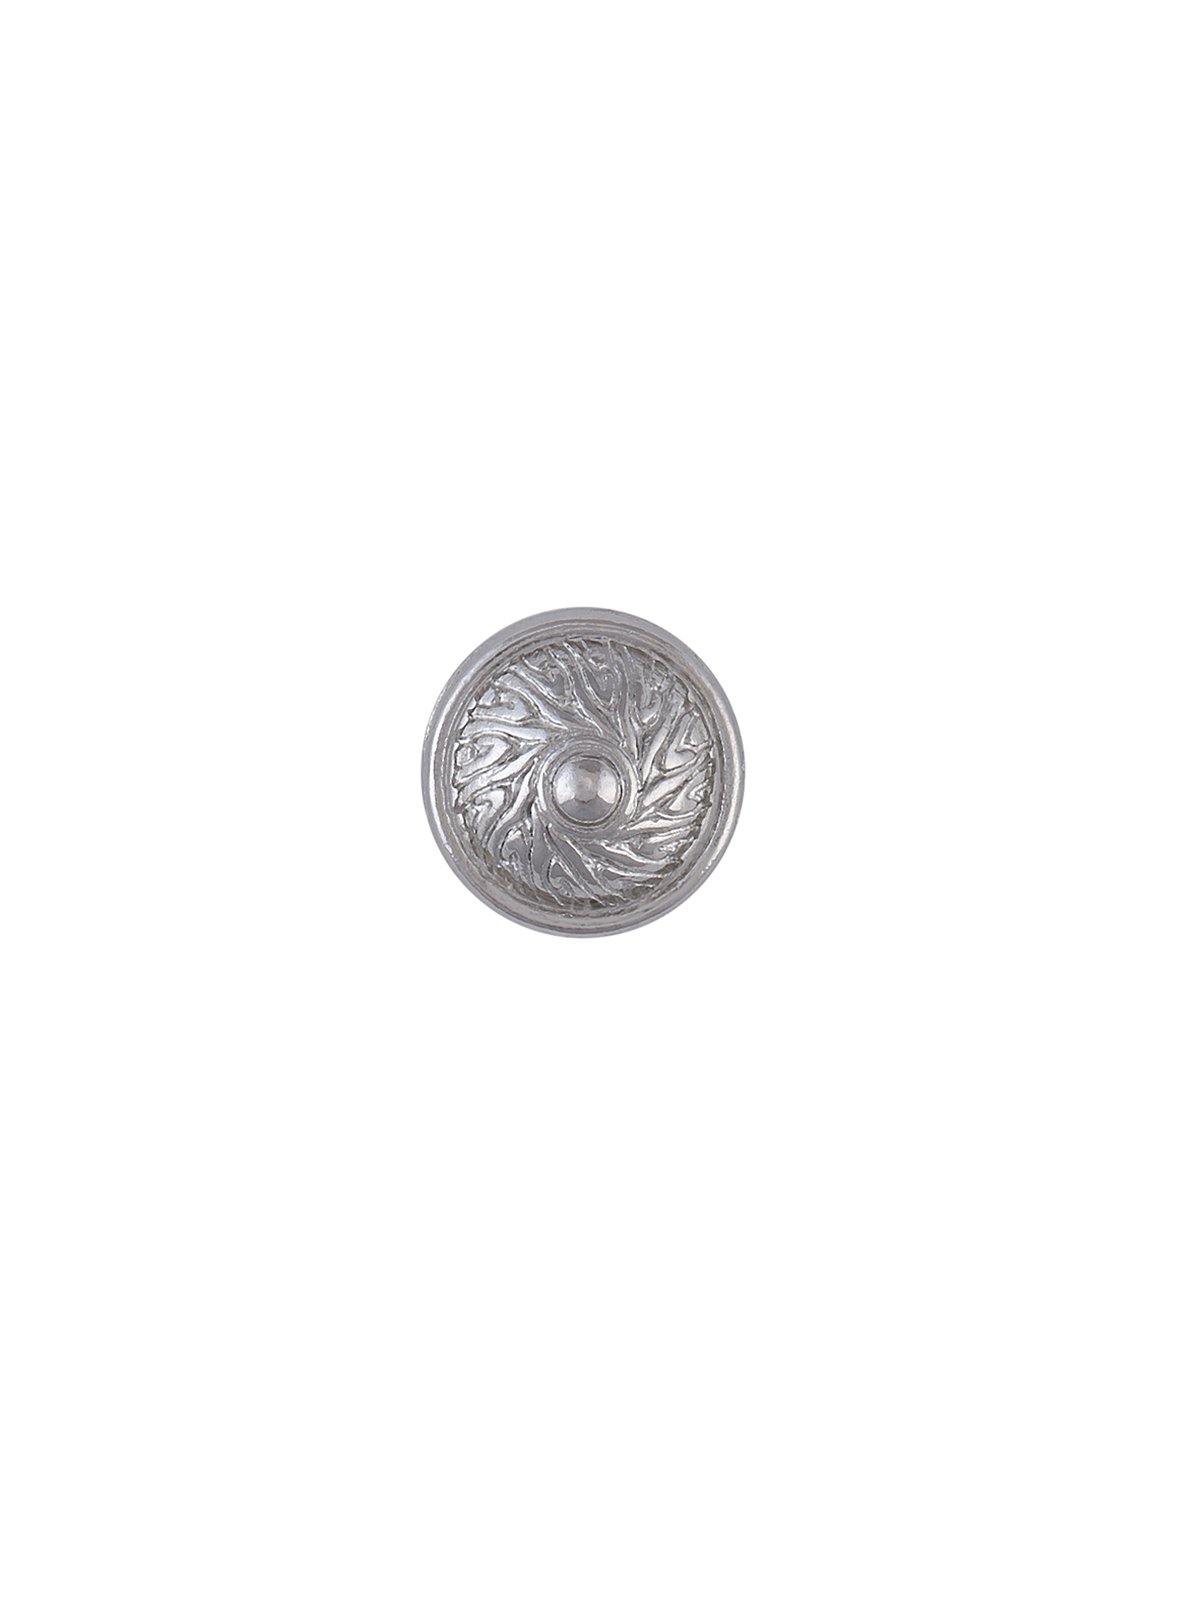 Classic Engraved Design 11mm Downhole Metal Button